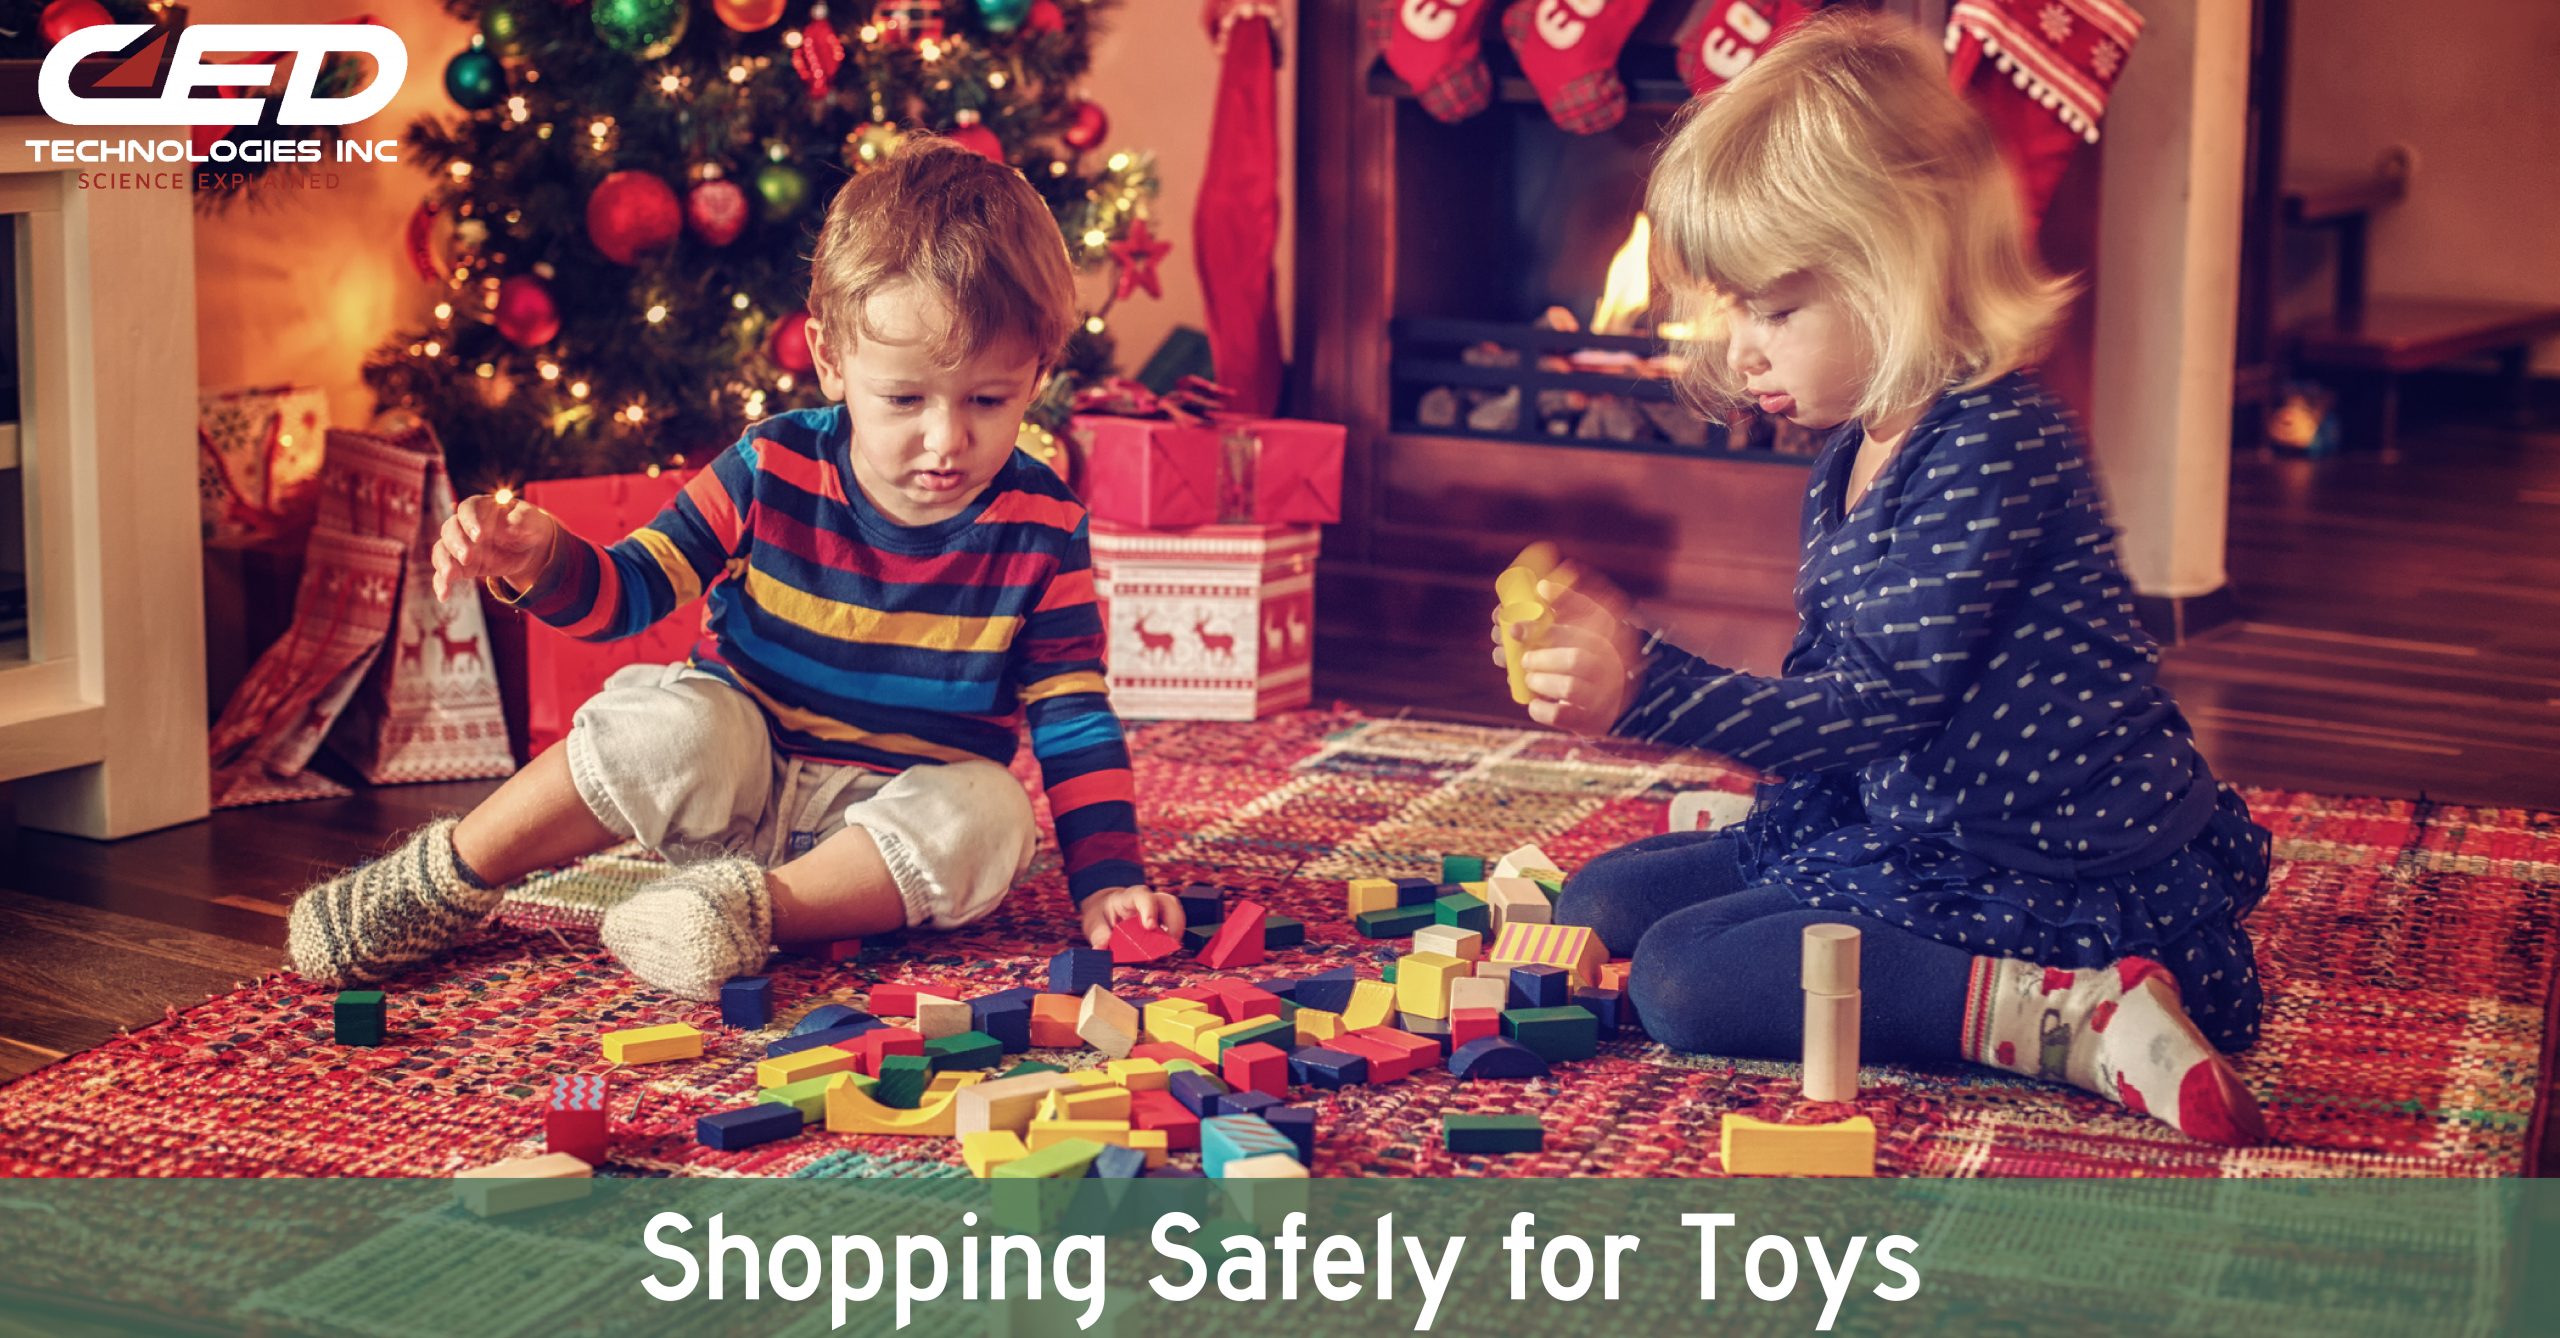 December is Toy Safety Month